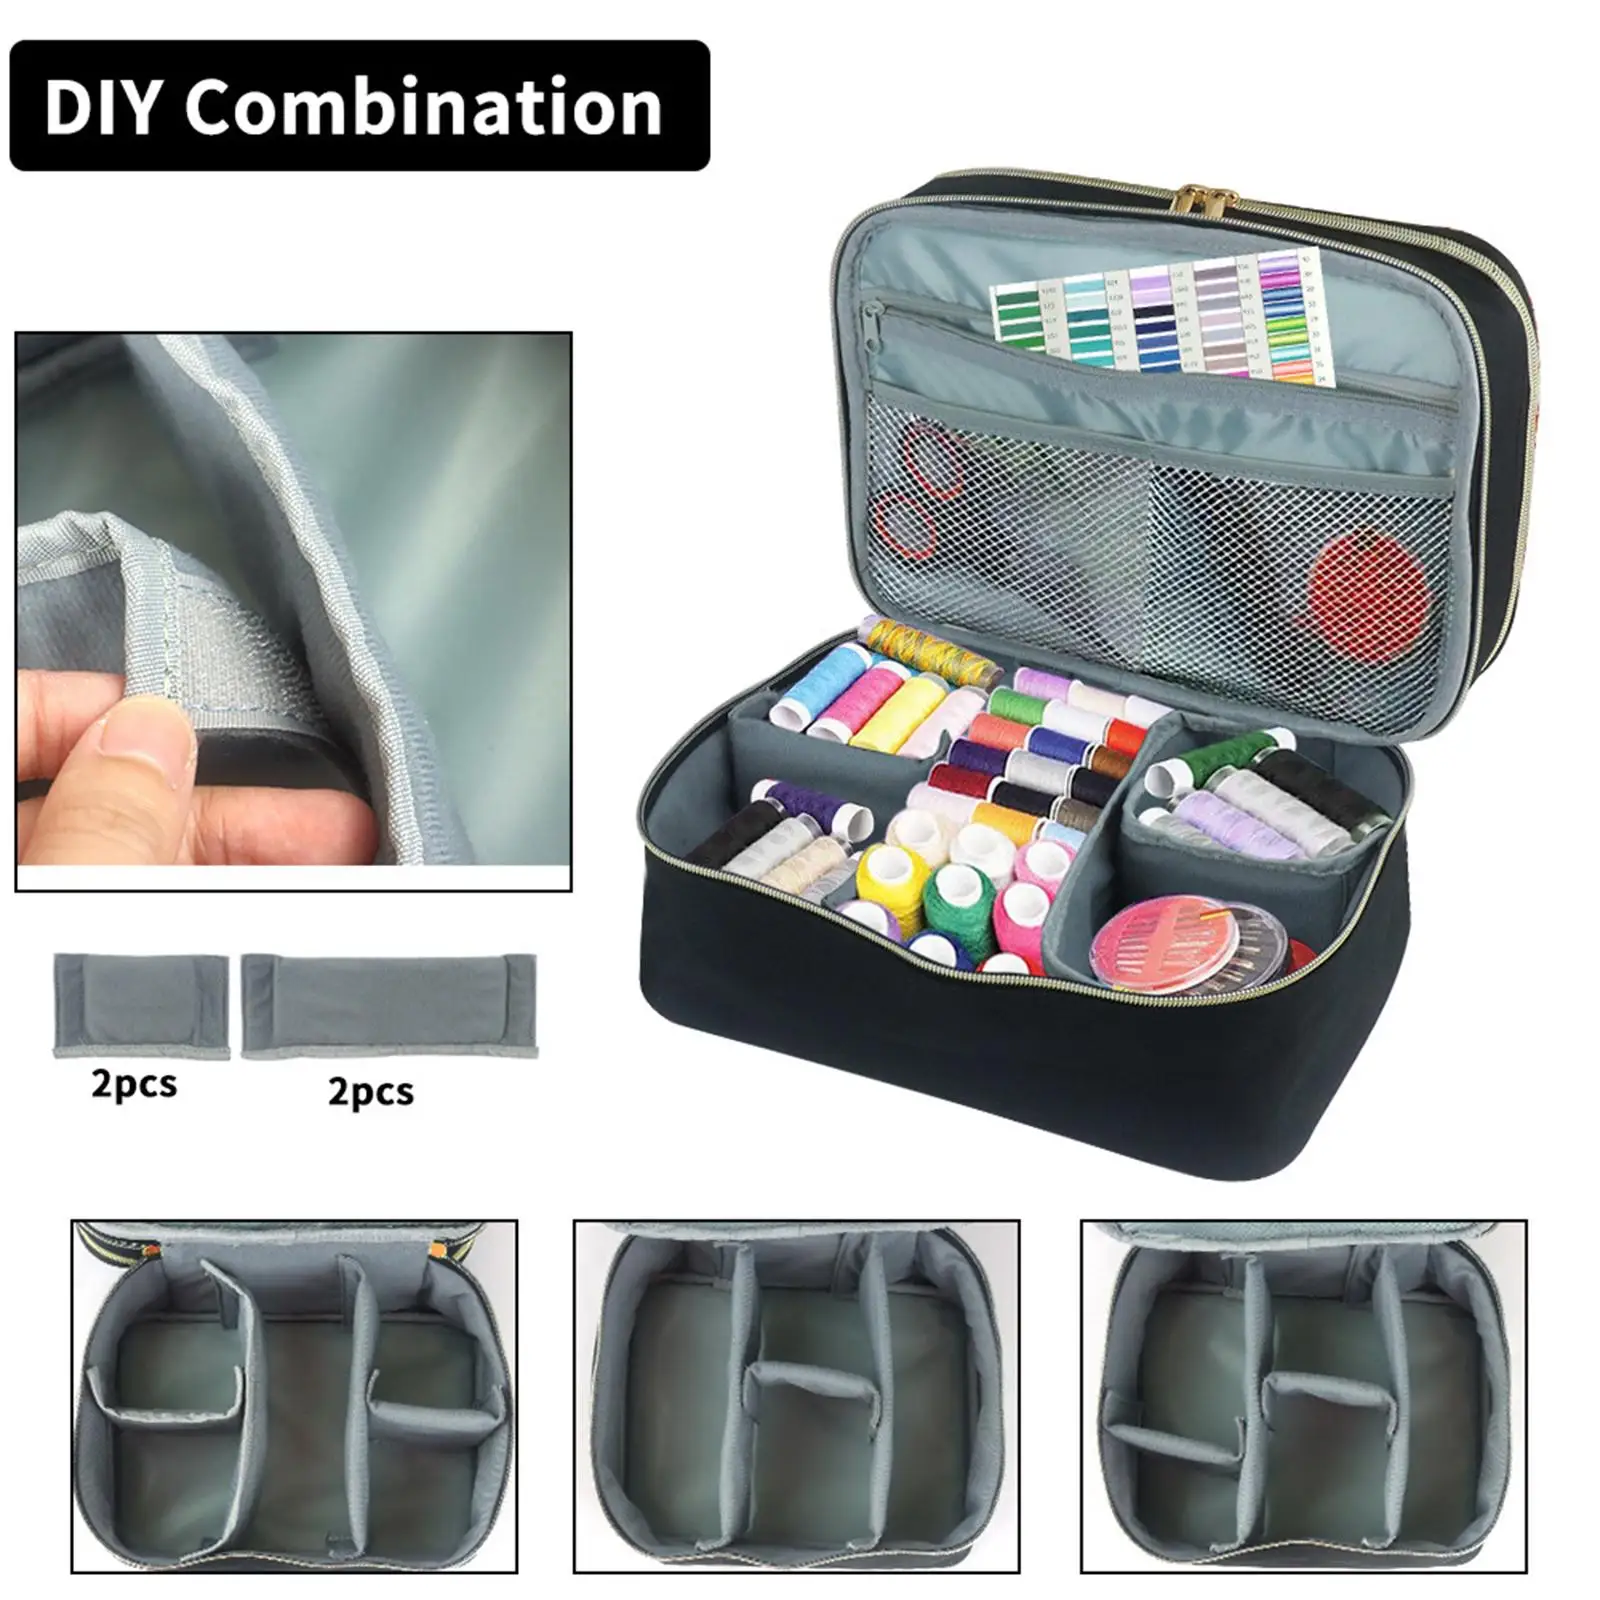 Sewing Accessories Storage Box Portable Supplies Multifunction for Buttons